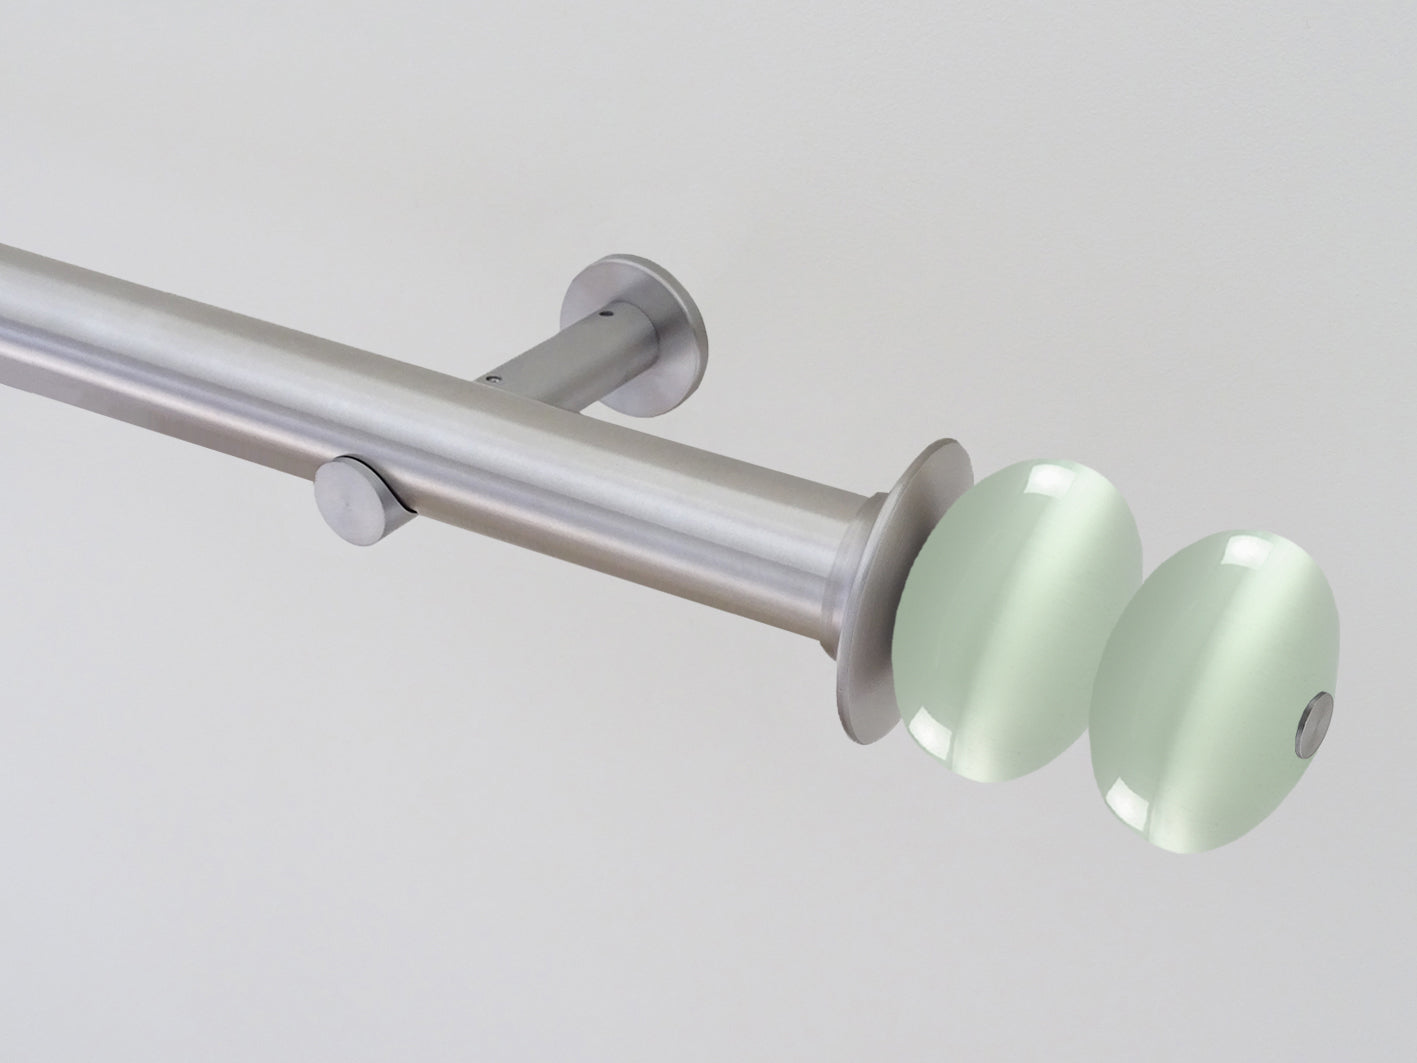 Stainless steel curtain pole 30mm diameter with coloured glass moonstone finials | Walcot House